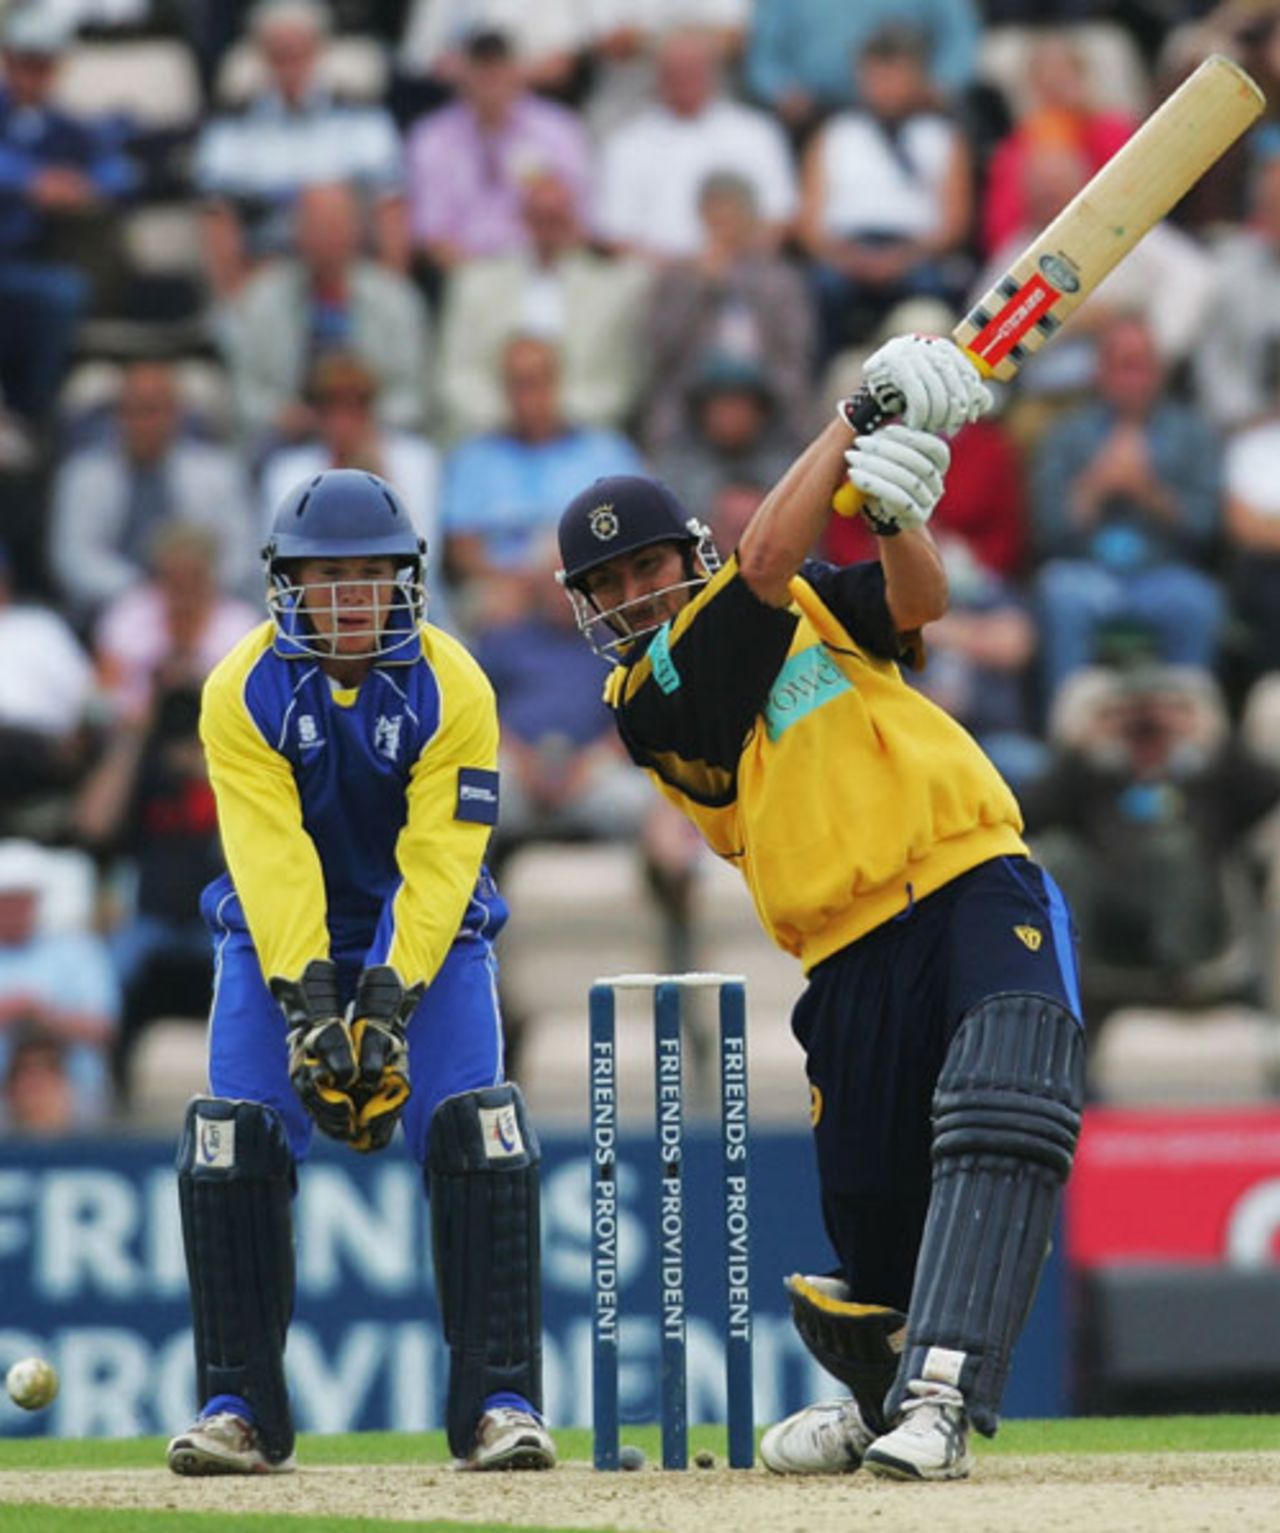 Nic Pothas hits out at the end of the innings, Hampshire v Warwickshire, Friends Provident Trophy semi-final, Southampton, June 20, 2007